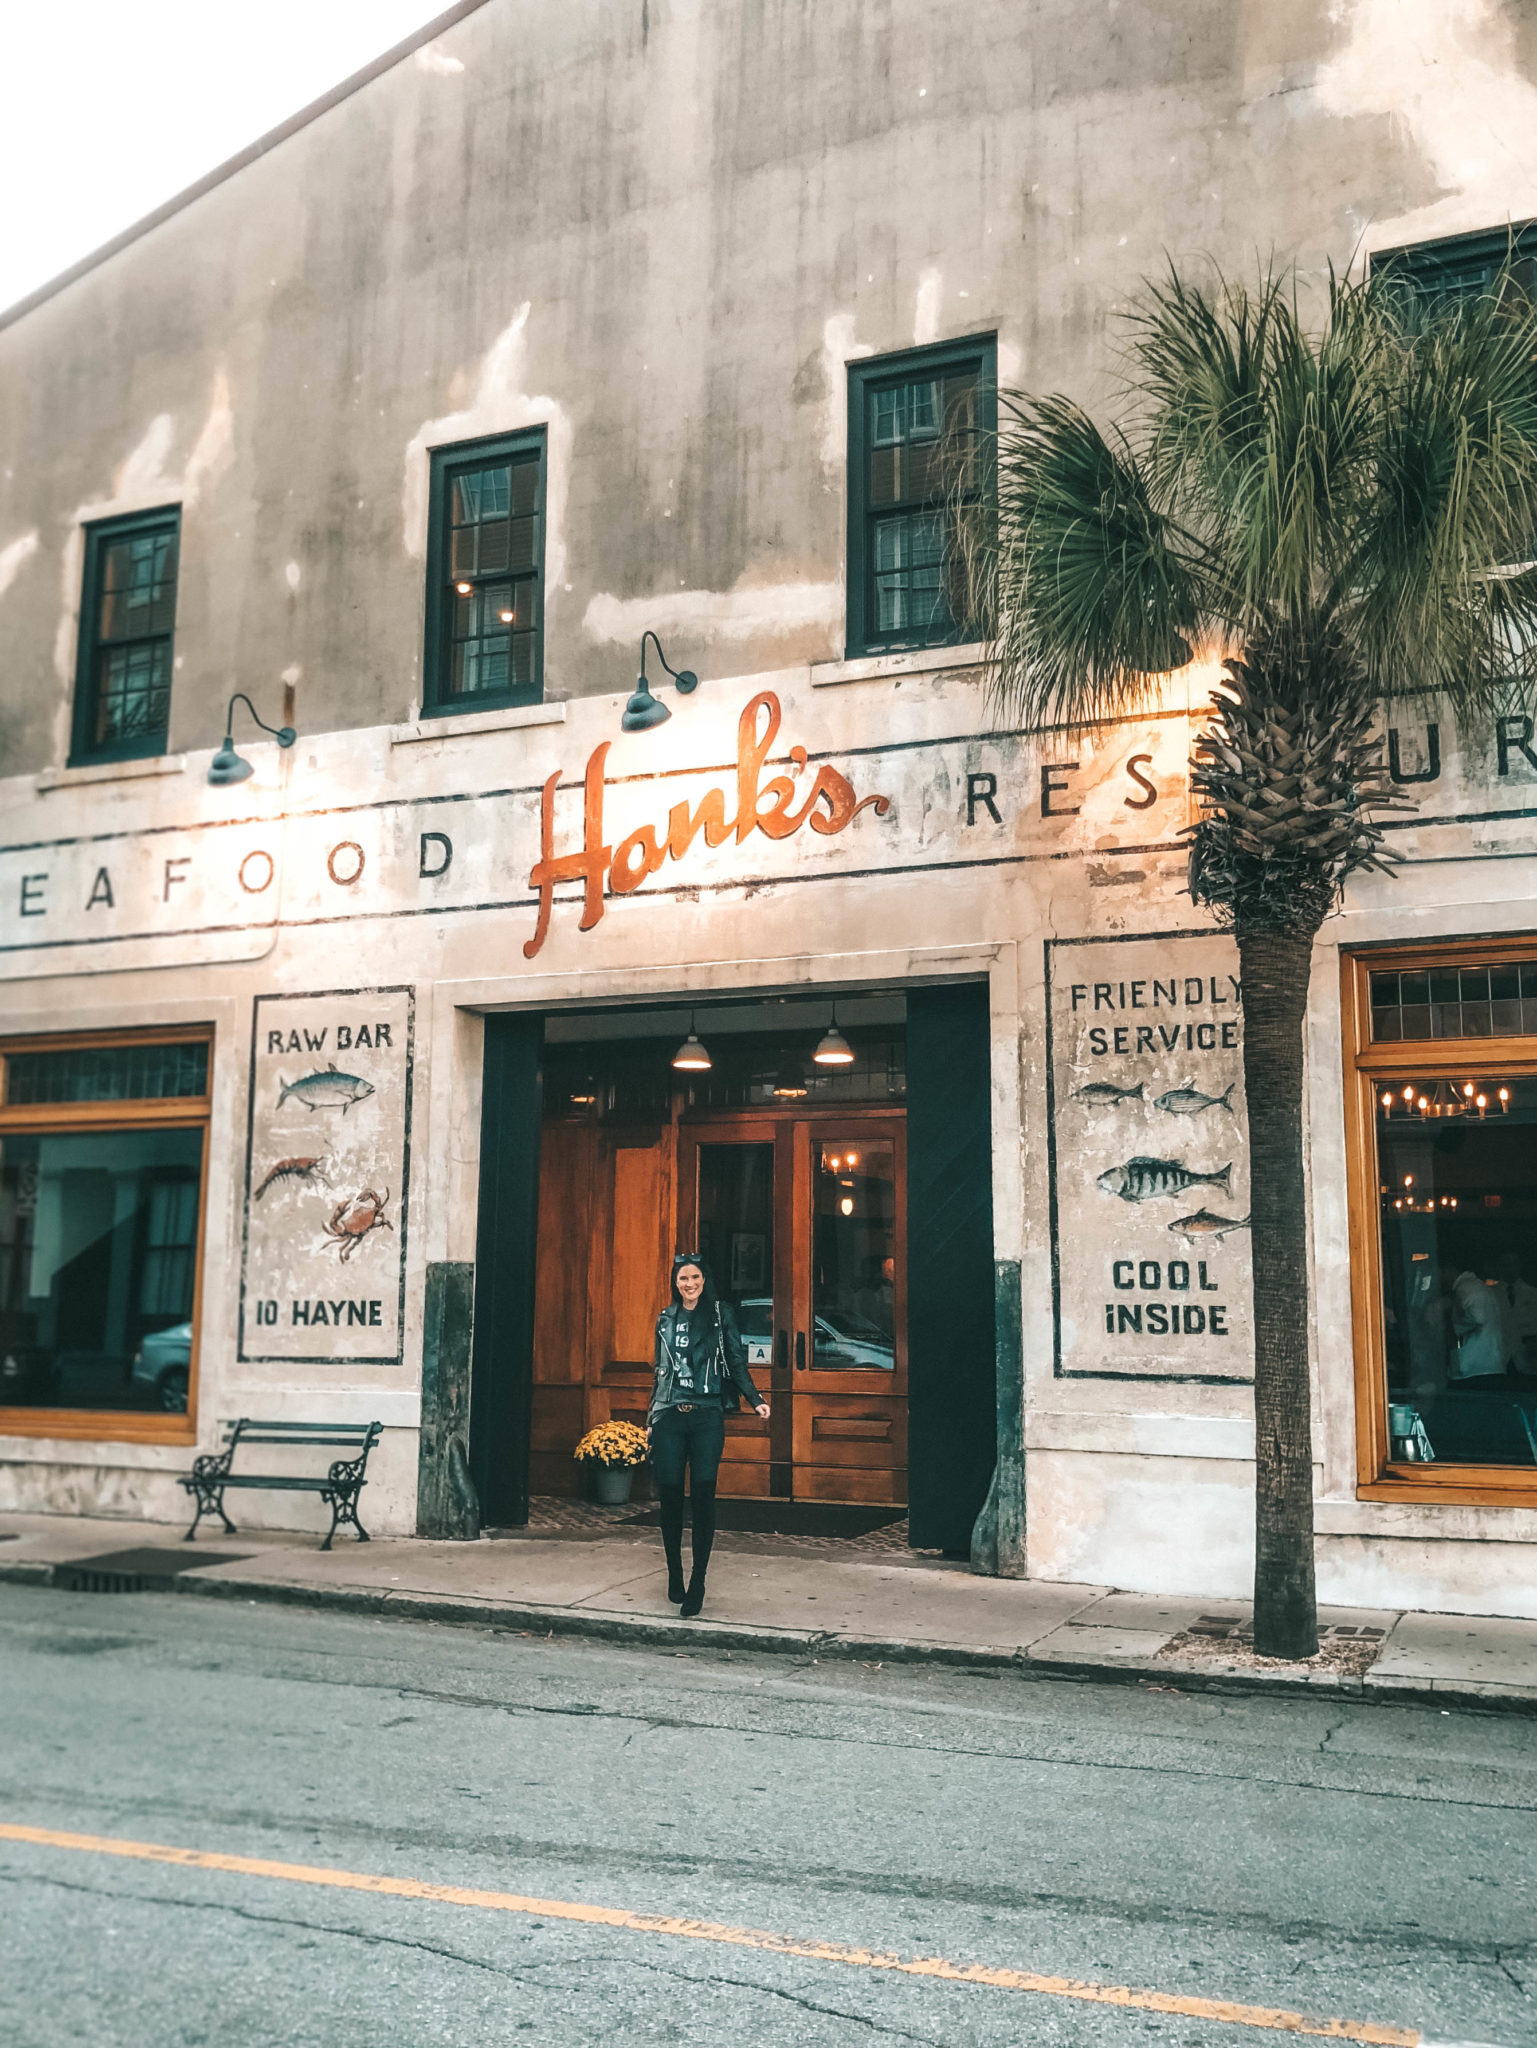 #Charleston #CharlestonSC #CharlestonVacation #volvocars #NewS60 #Middletonplace #southernplantation #helicoptertour #rainbowrow #thedewberry | Volvo | A Weekend in Charleston: the Best Things to Do featured by top Austin travel blogger Dressed to Kill